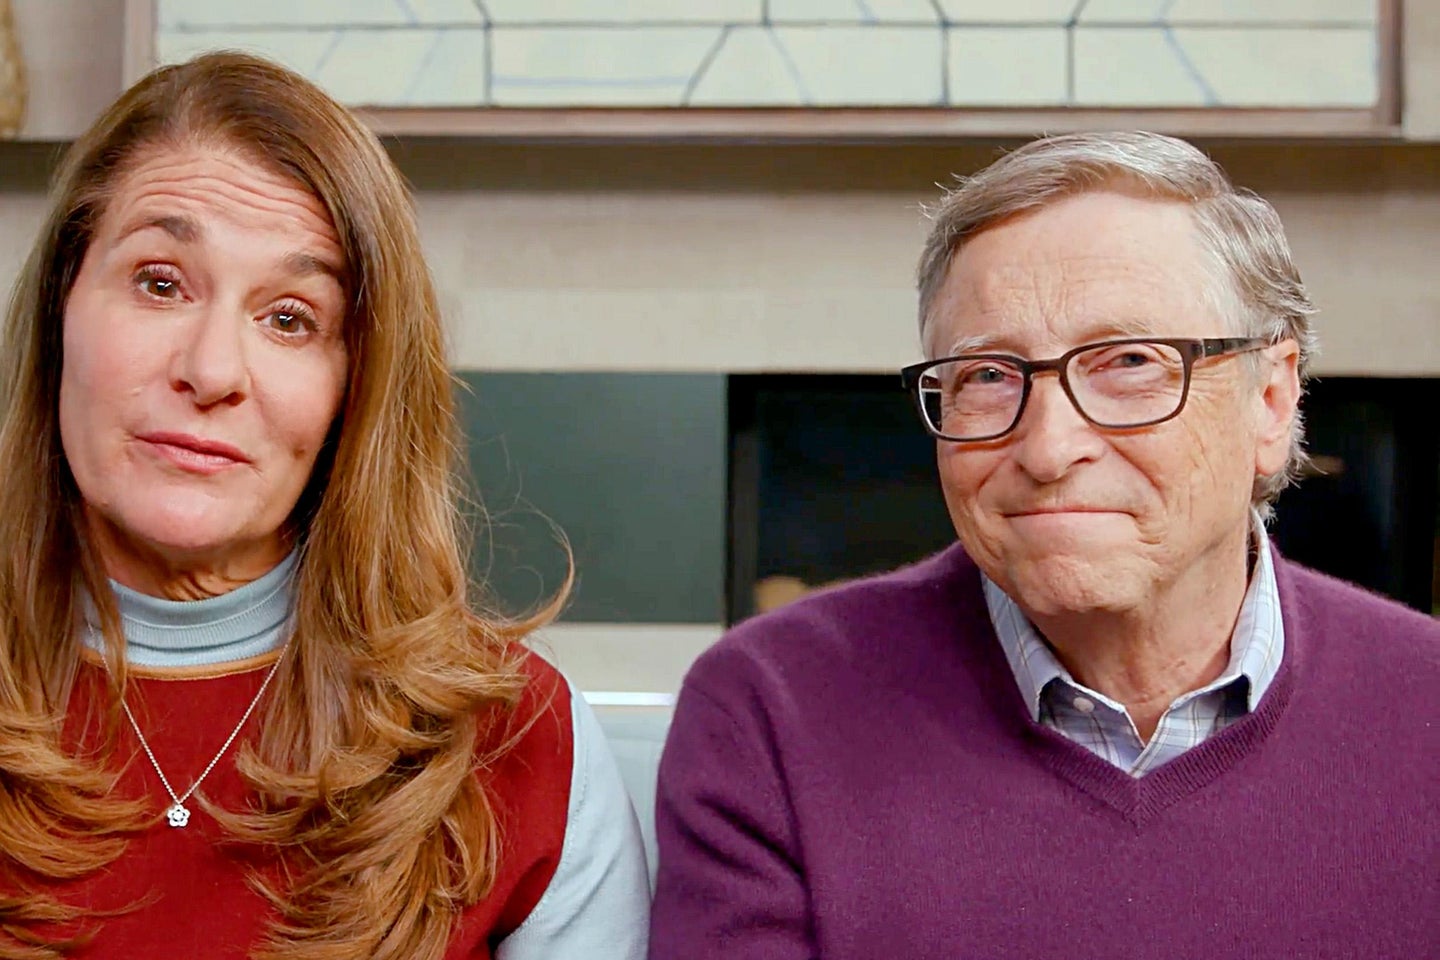 Bill and Melinda Gates' "broken" marriage Key details from the NYT